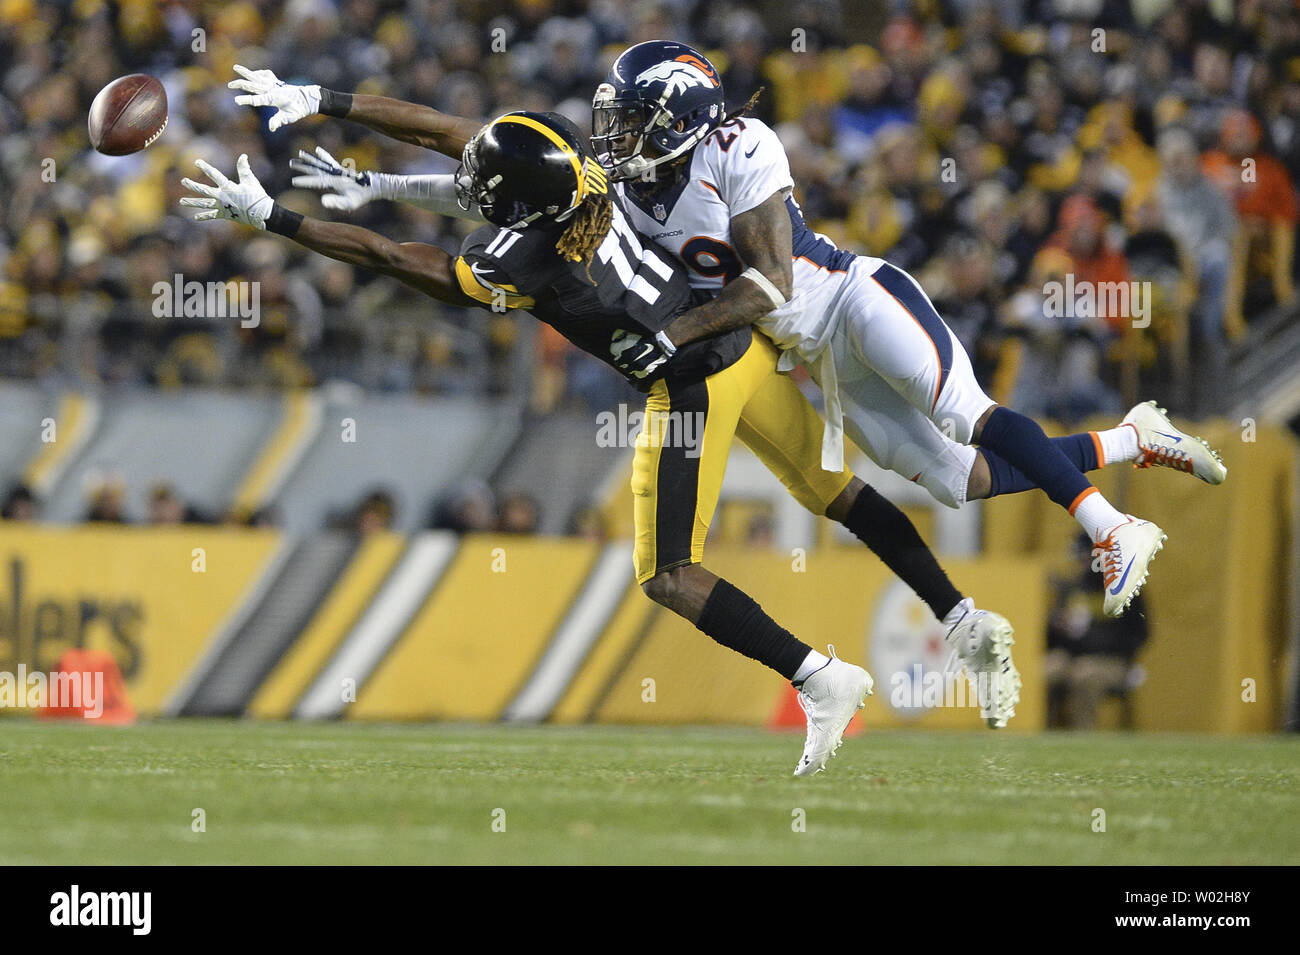 Denver Broncos free safety Bradley Roby (29) deflects a pass intended for Pittsburgh Steelers wide receiver Markus Wheaton (11). Denver Broncos defensive back Josh Bush caught the deflected ball and ran for a 13 yard gain during the game at Heinz Field in Pittsburgh on December 20, 2015.  Photo by Shelley Lipton/UPI Stock Photo